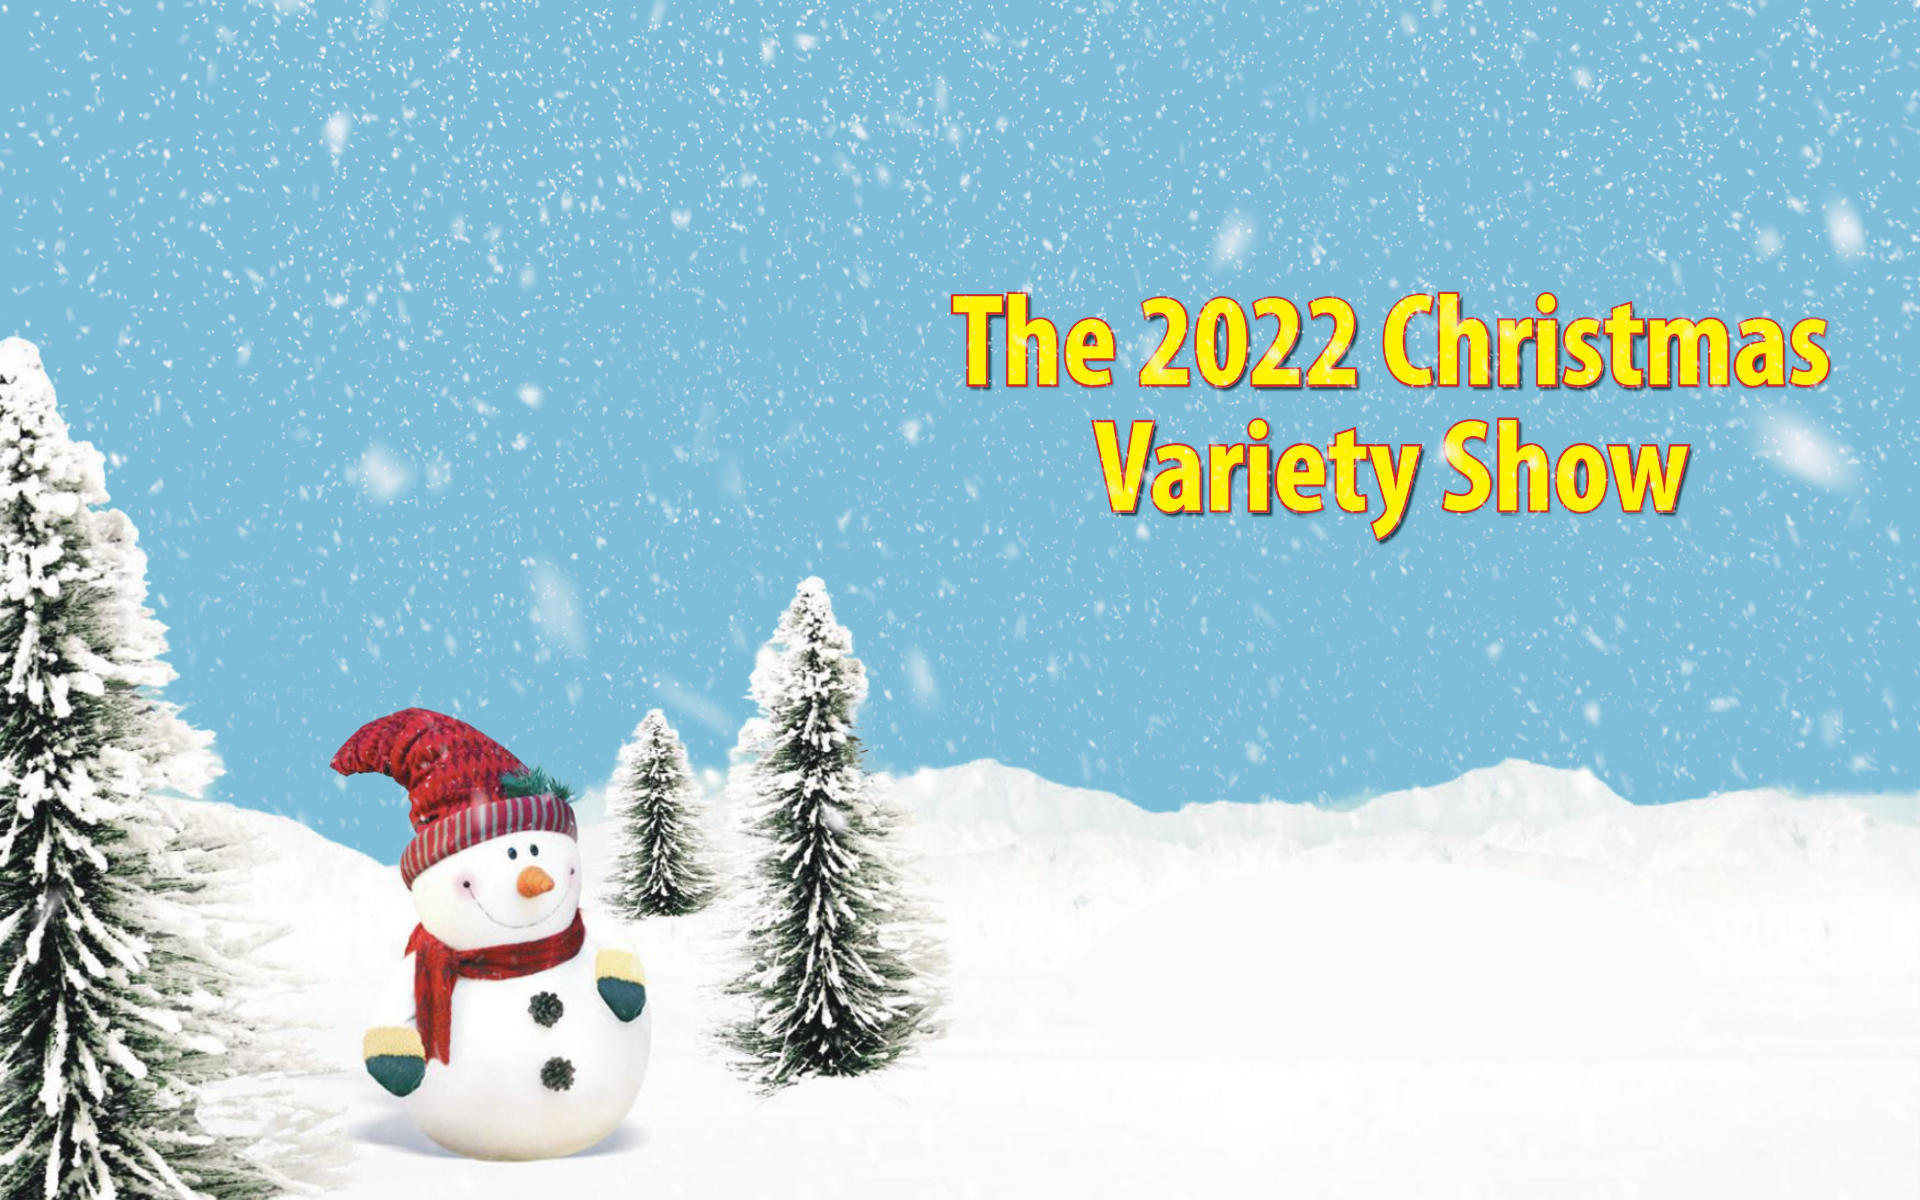 A cartoon snowman stands in the snow. The title says 'The 2022 Christmas Variety Show'